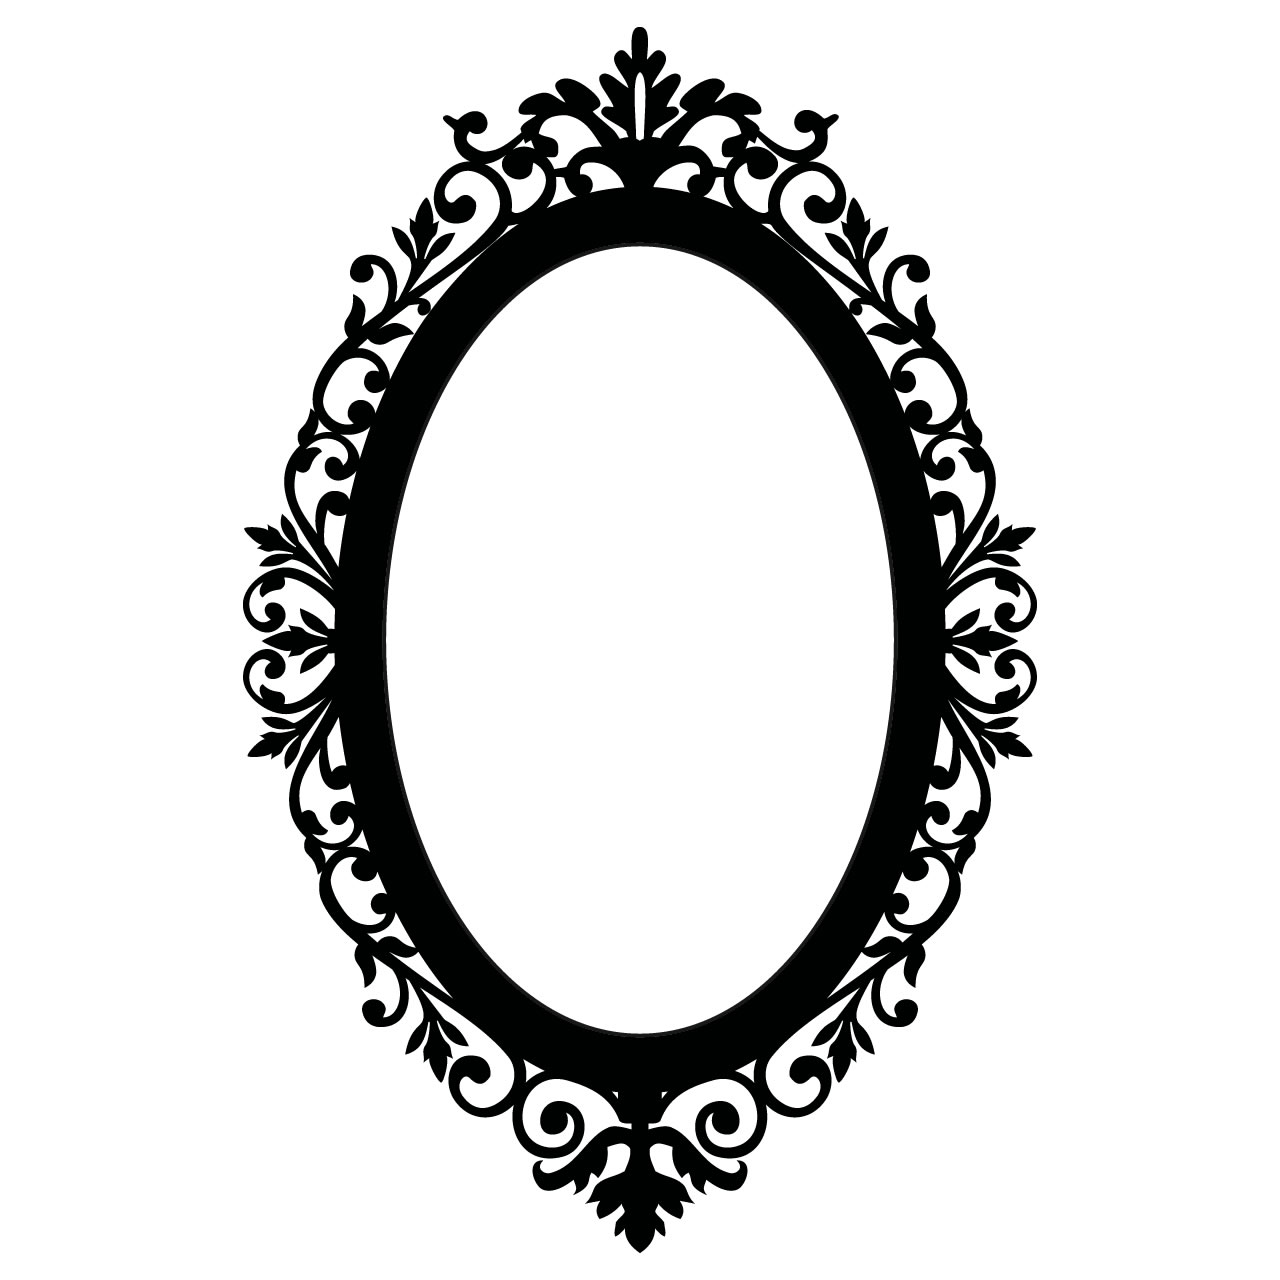 Antique oval frame clipart 